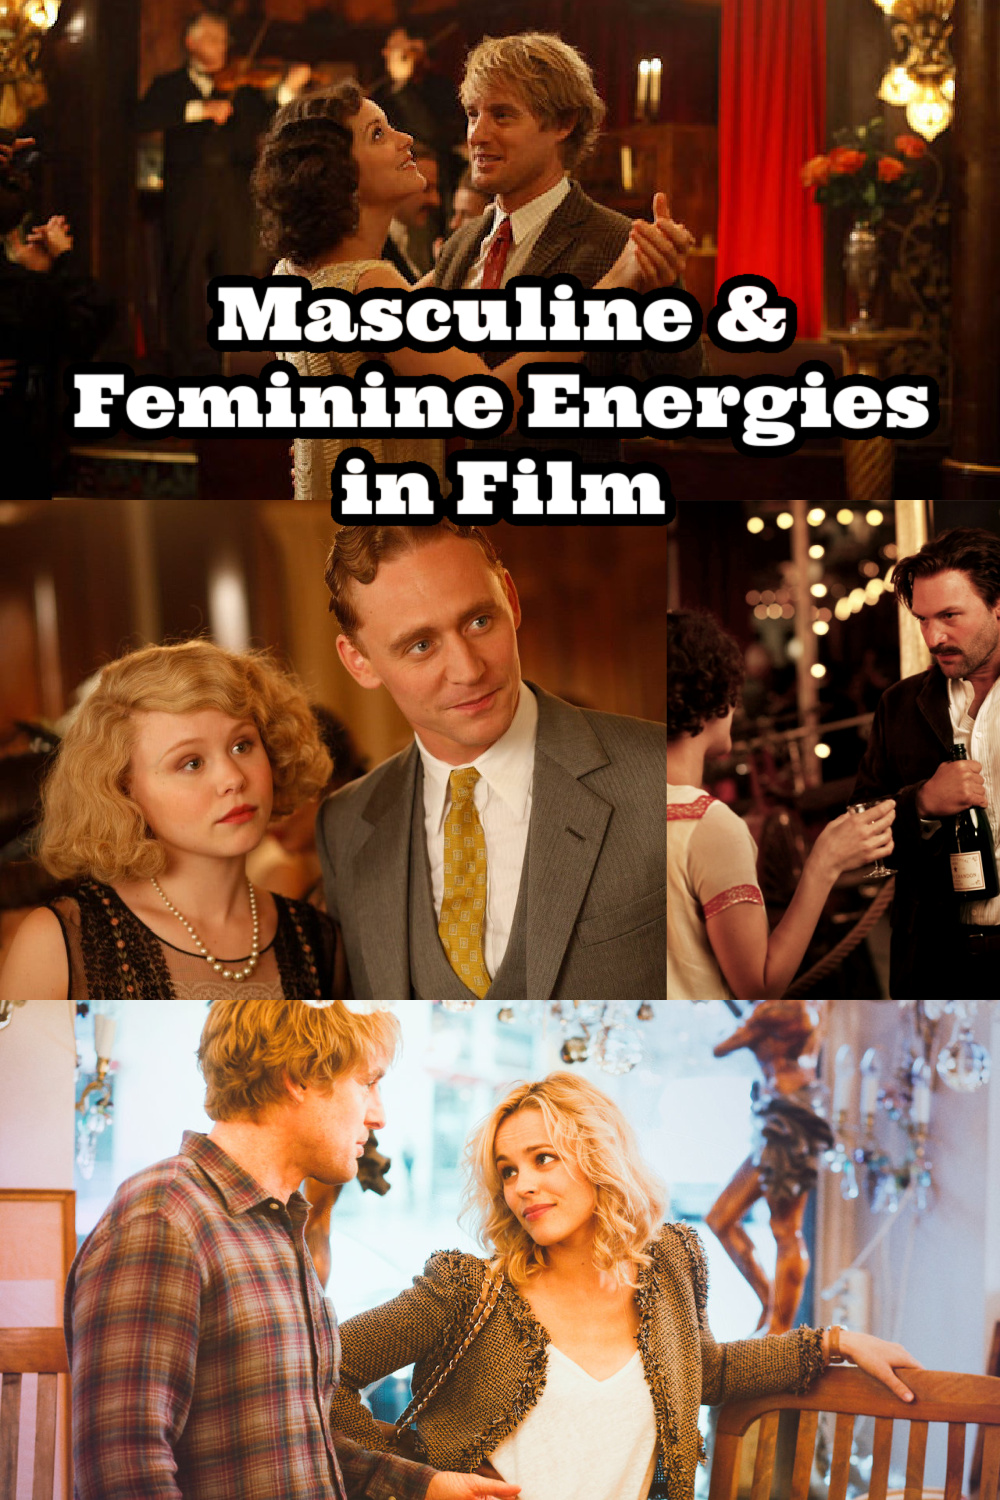 midnight in paris film review, feminine and masculine energy in relationships, what women really want in a man, understanding masculine and feminine energy, feminine and masculine energy in relationships, sexual polarity in relationships, sexual polarity, sexual polarity masculine feminine, law of polarity in relationships, how to create polarity in relationships, wounded femininity in men, femininity in relationships, wounded feminine energy traits, wounded feminine and masculine, wounded feminine energy in a man, passive men, feminine movie character breakdown, feminine film, femininity in film, masculine and feminine examples, feminine films, femininity in movies,Everyday starlet, sarah blodgett,